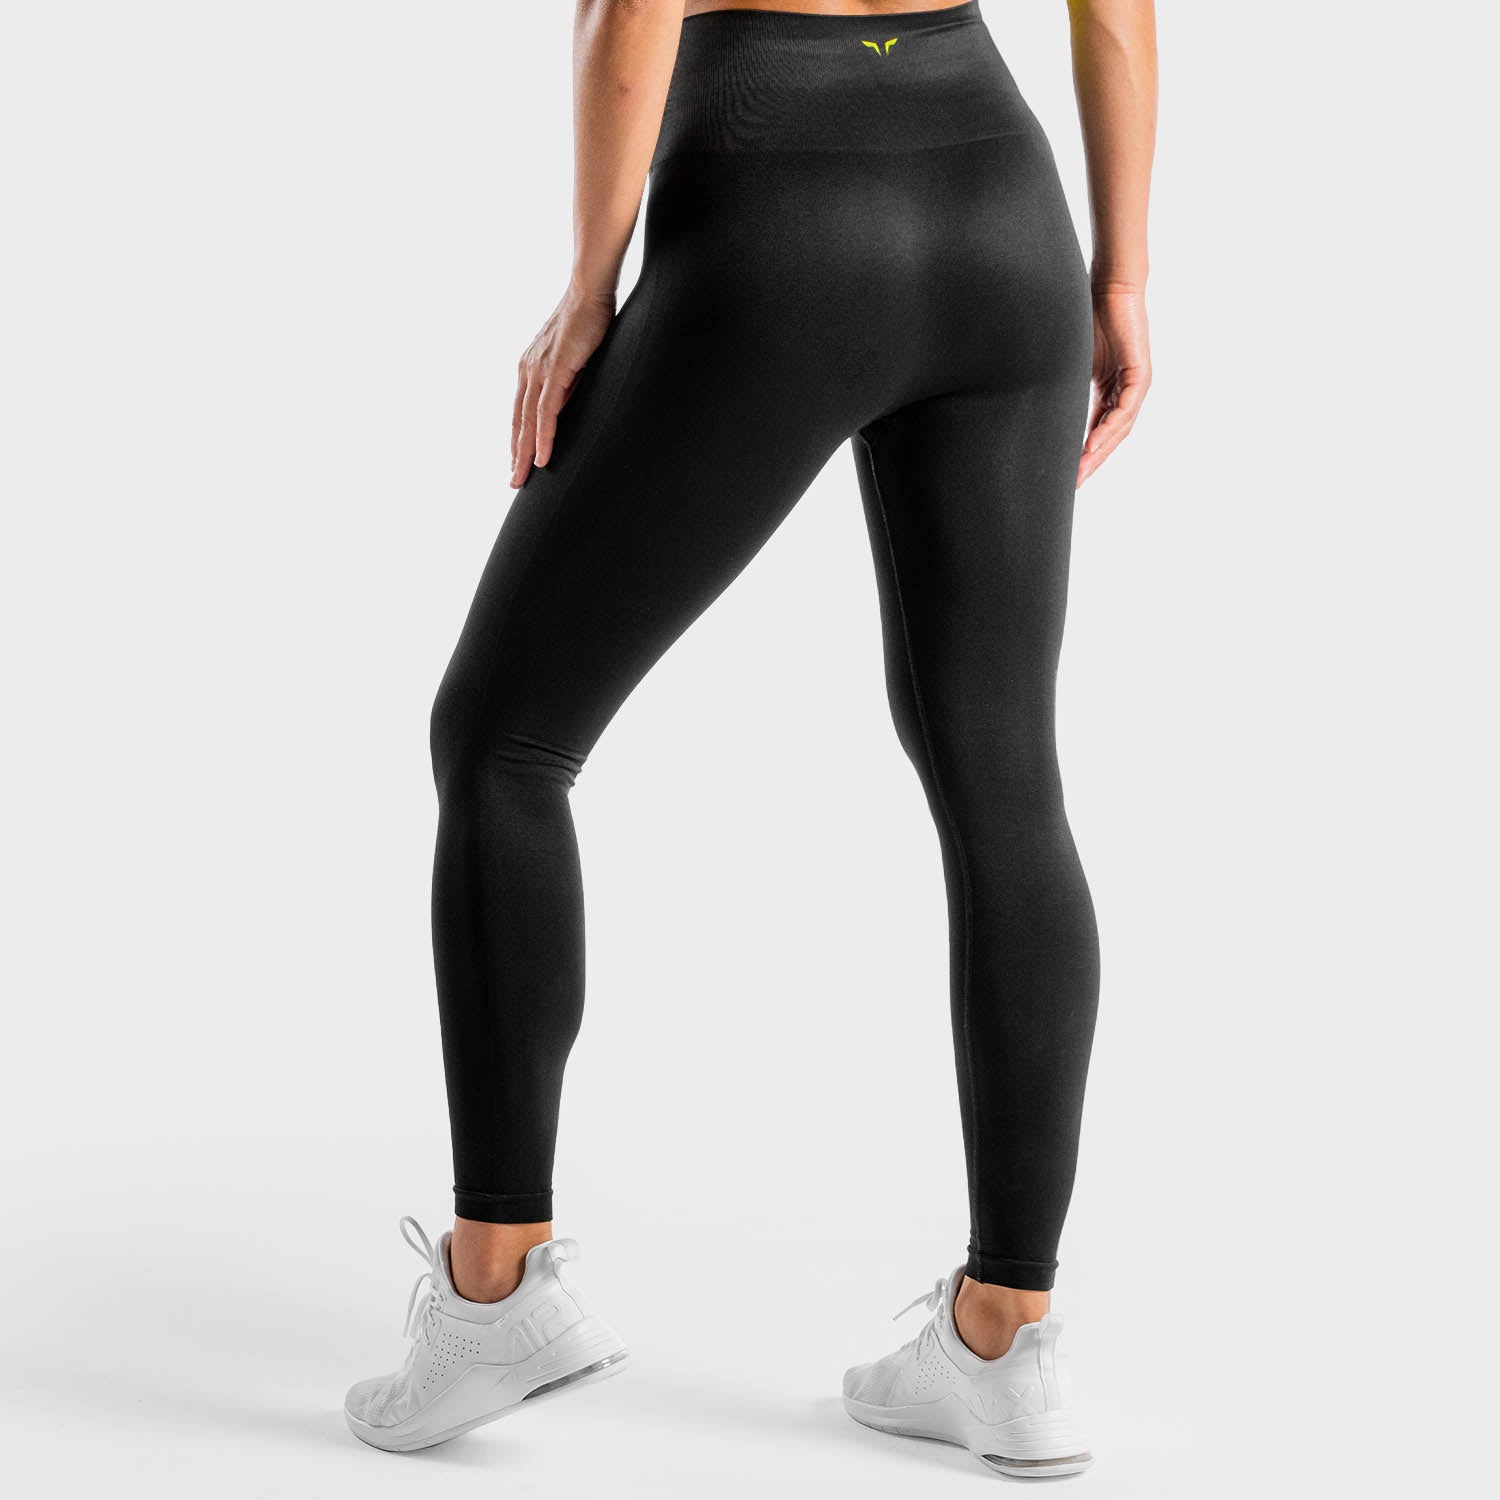 squatwolf-gym-leggings-for-women-core-seamless-leggings-onyx-workout-clothes